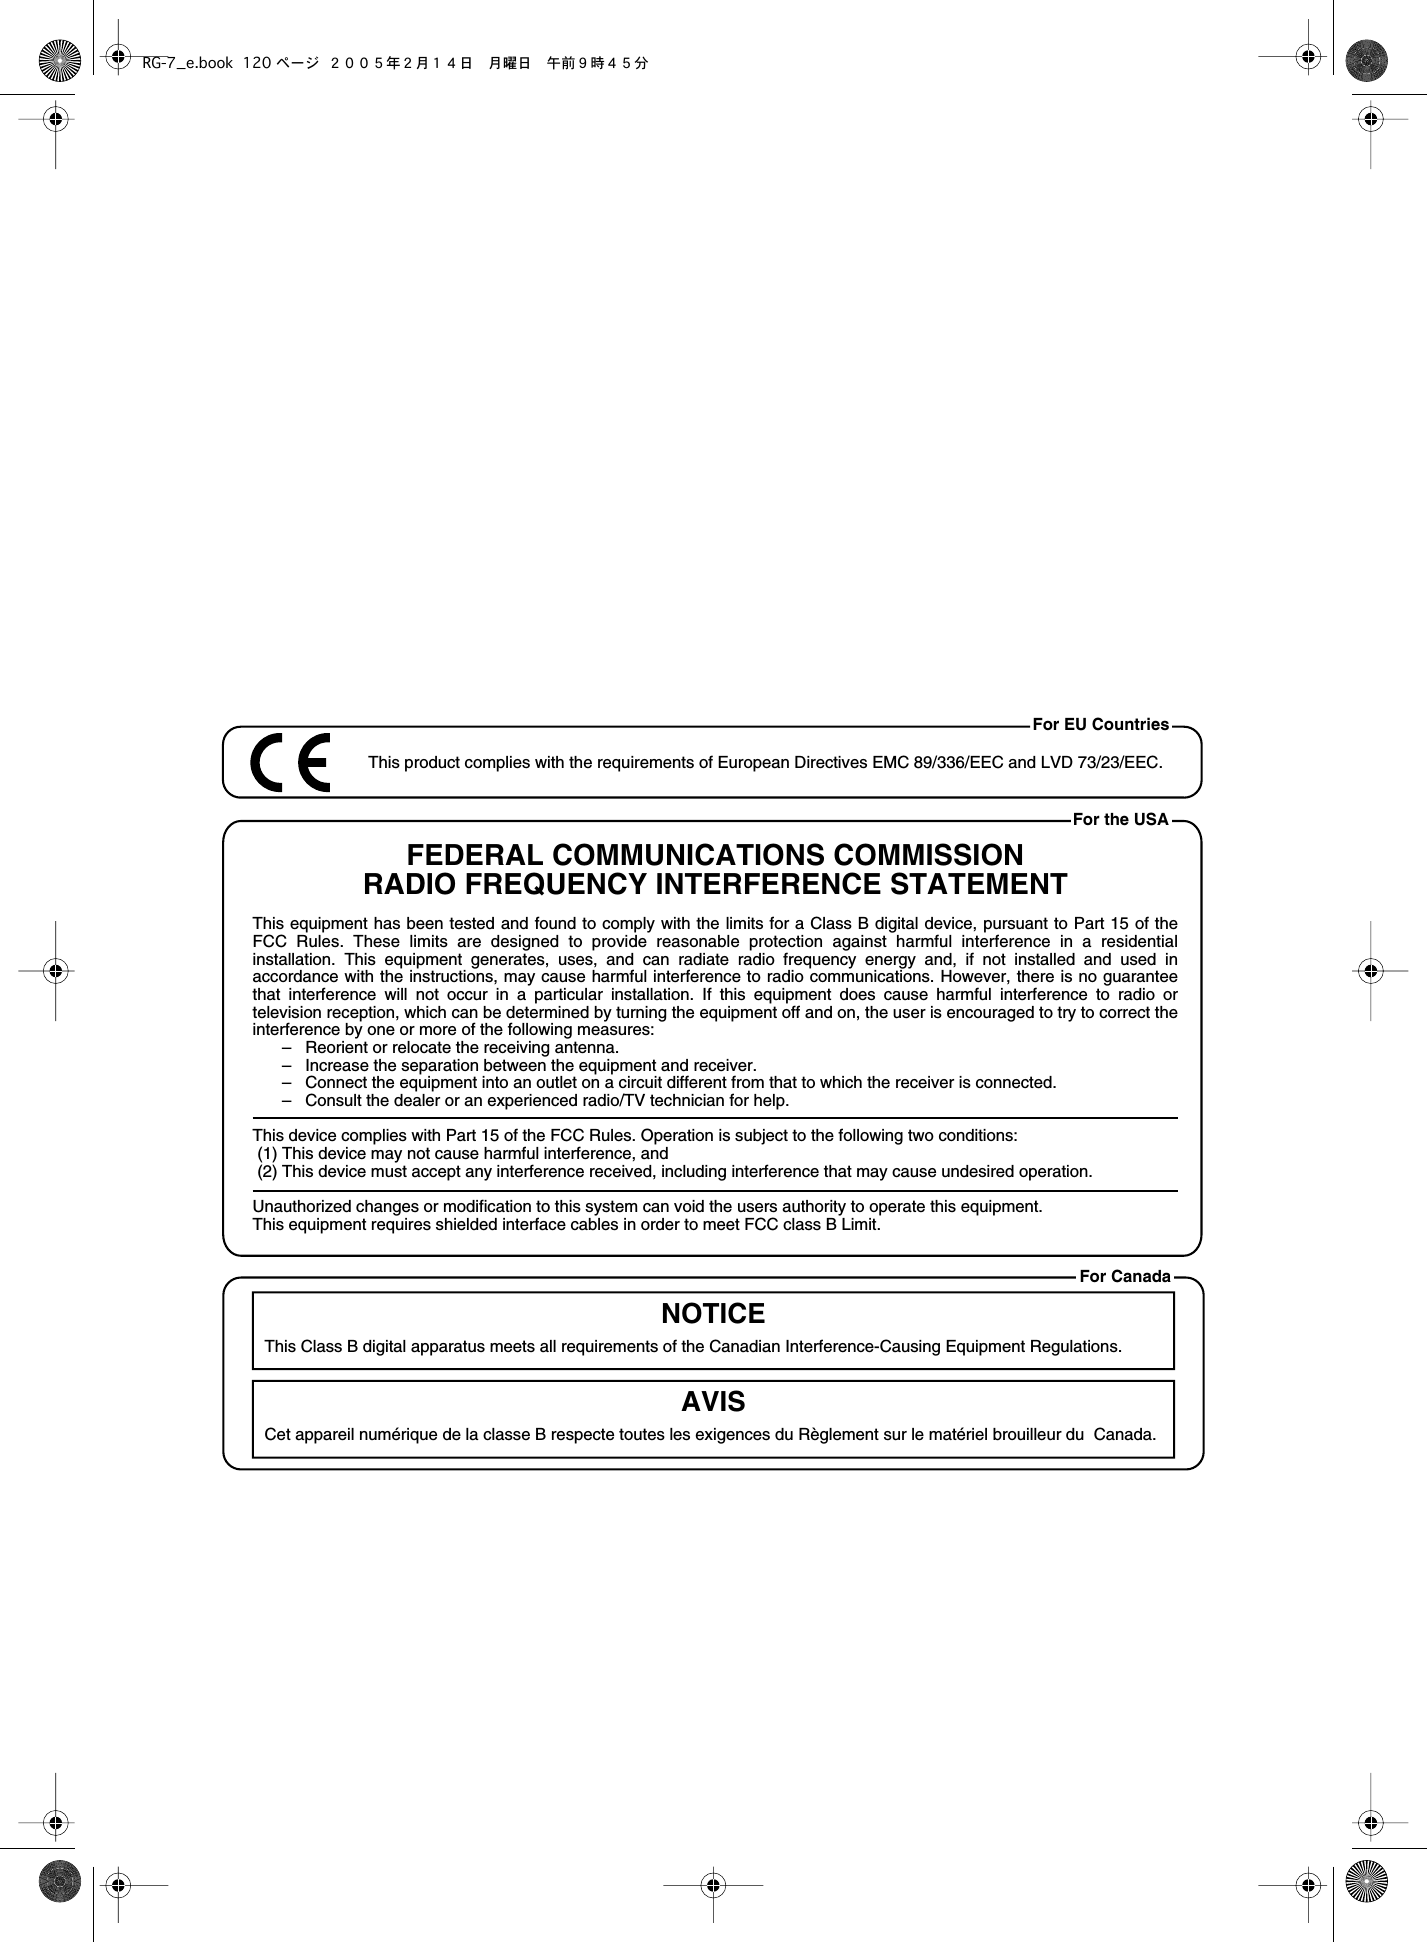 This product complies with the requirements of European Directives EMC 89/336/EEC and LVD 73/23/EEC.For EU CountriesFor CanadaThis Class B digital apparatus meets all requirements of the Canadian Interference-Causing Equipment Regulations.Cet appareil numérique de la classe B respecte toutes les exigences du Règlement sur le matériel brouilleur du  Canada.NOTICEAVISFor the USAFEDERAL COMMUNICATIONS COMMISSIONRADIO FREQUENCY INTERFERENCE STATEMENTThis equipment has been tested and found to comply with the limits for a Class B digital device, pursuant to Part 15 of the FCC Rules. These limits are designed to provide reasonable protection against harmful interference in a residential installation. This equipment generates, uses, and can radiate radio frequency energy and, if not installed and used in accordance with the instructions, may cause harmful interference to radio communications. However, there is no guarantee that interference will not occur in a particular installation. If this equipment does cause harmful interference to radio or television reception, which can be determined by turning the equipment off and on, the user is encouraged to try to correct the interference by one or more of the following measures:–   Reorient or relocate the receiving antenna.–   Increase the separation between the equipment and receiver.–   Connect the equipment into an outlet on a circuit different from that to which the receiver is connected.–   Consult the dealer or an experienced radio/TV technician for help.This device complies with Part 15 of the FCC Rules. Operation is subject to the following two conditions: (1) This device may not cause harmful interference, and (2) This device must accept any interference received, including interference that may cause undesired operation.Unauthorized changes or modification to this system can void the users authority to operate this equipment.This equipment requires shielded interface cables in order to meet FCC class B Limit.RG-7_e.book 120 ページ ２００５年２月１４日　月曜日　午前９時４５分